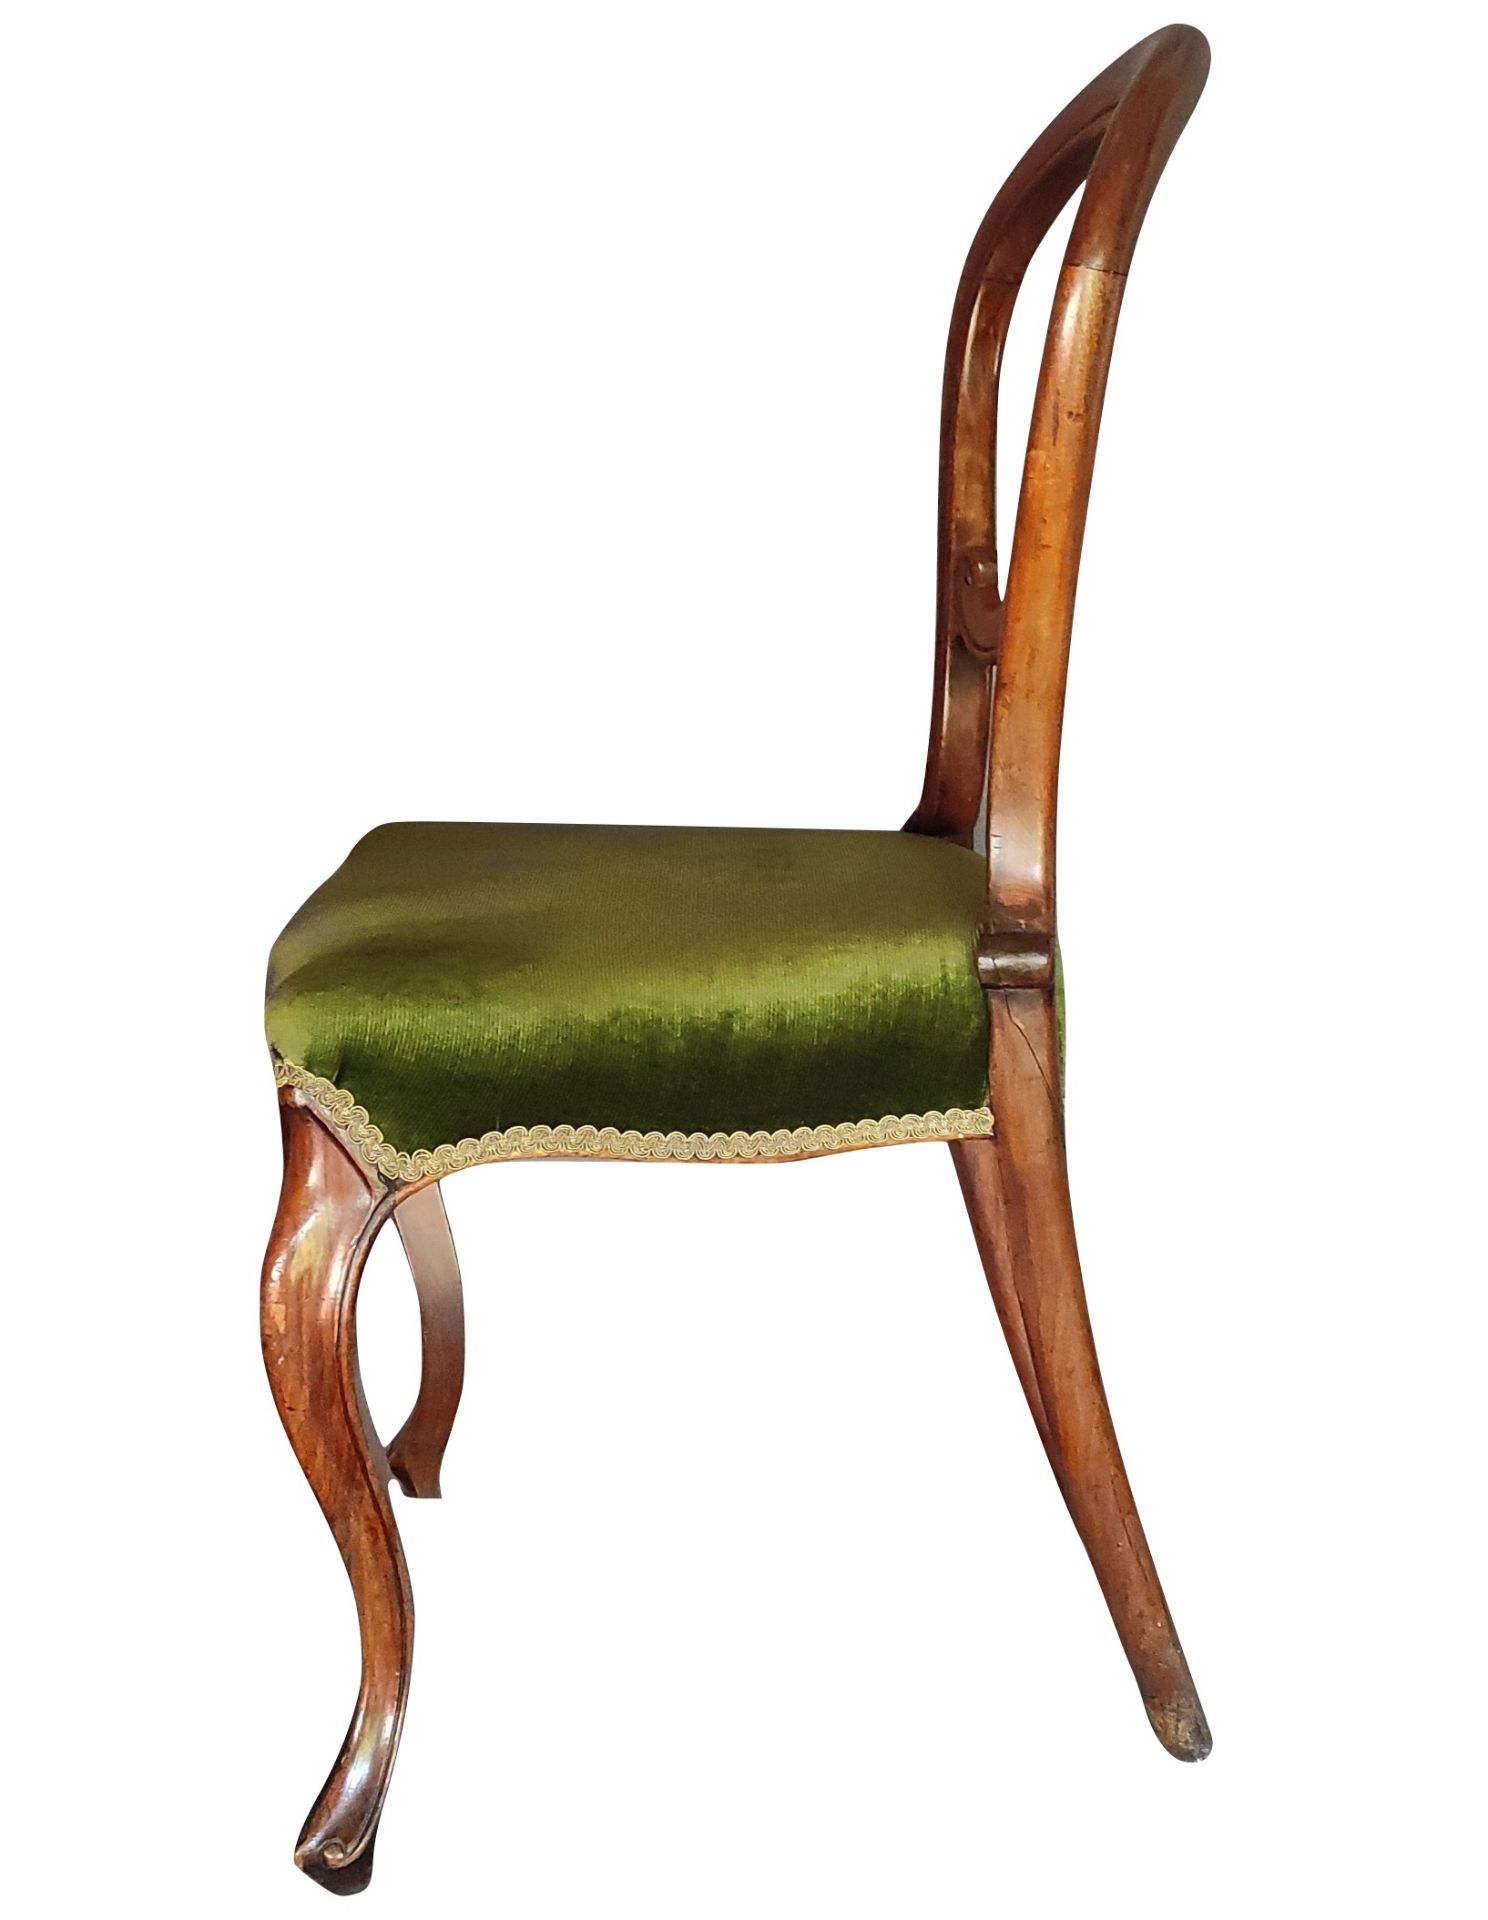 Ornamental side chair, Viennese Baroque, openwork and curved backrest, front legs curved with indic - Image 3 of 3